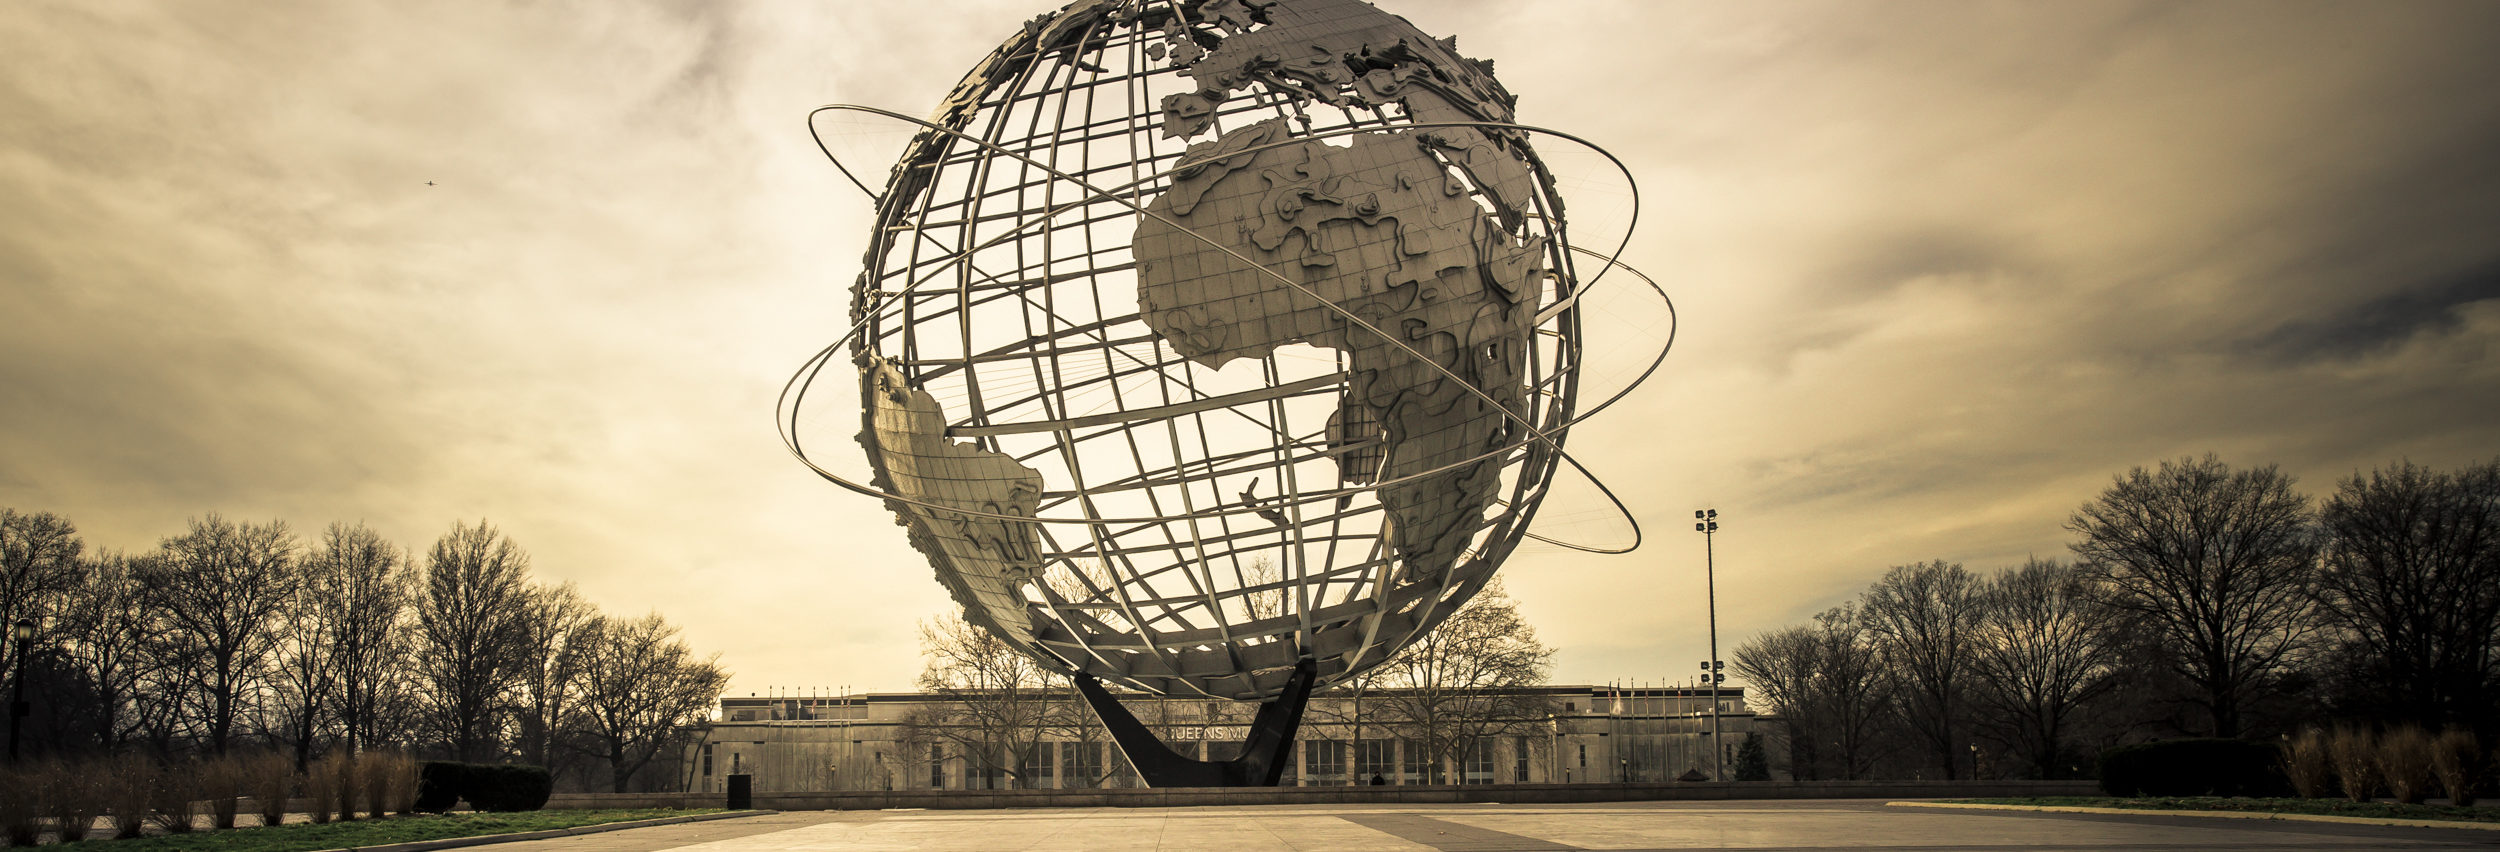 NEW YORK CITY - JANUARY 7, 2016: Vintage Unisphere at Flushing Meadows-Corona Park in Queens was installed for the 1964 World's Fair. - Image [Shutterstock]